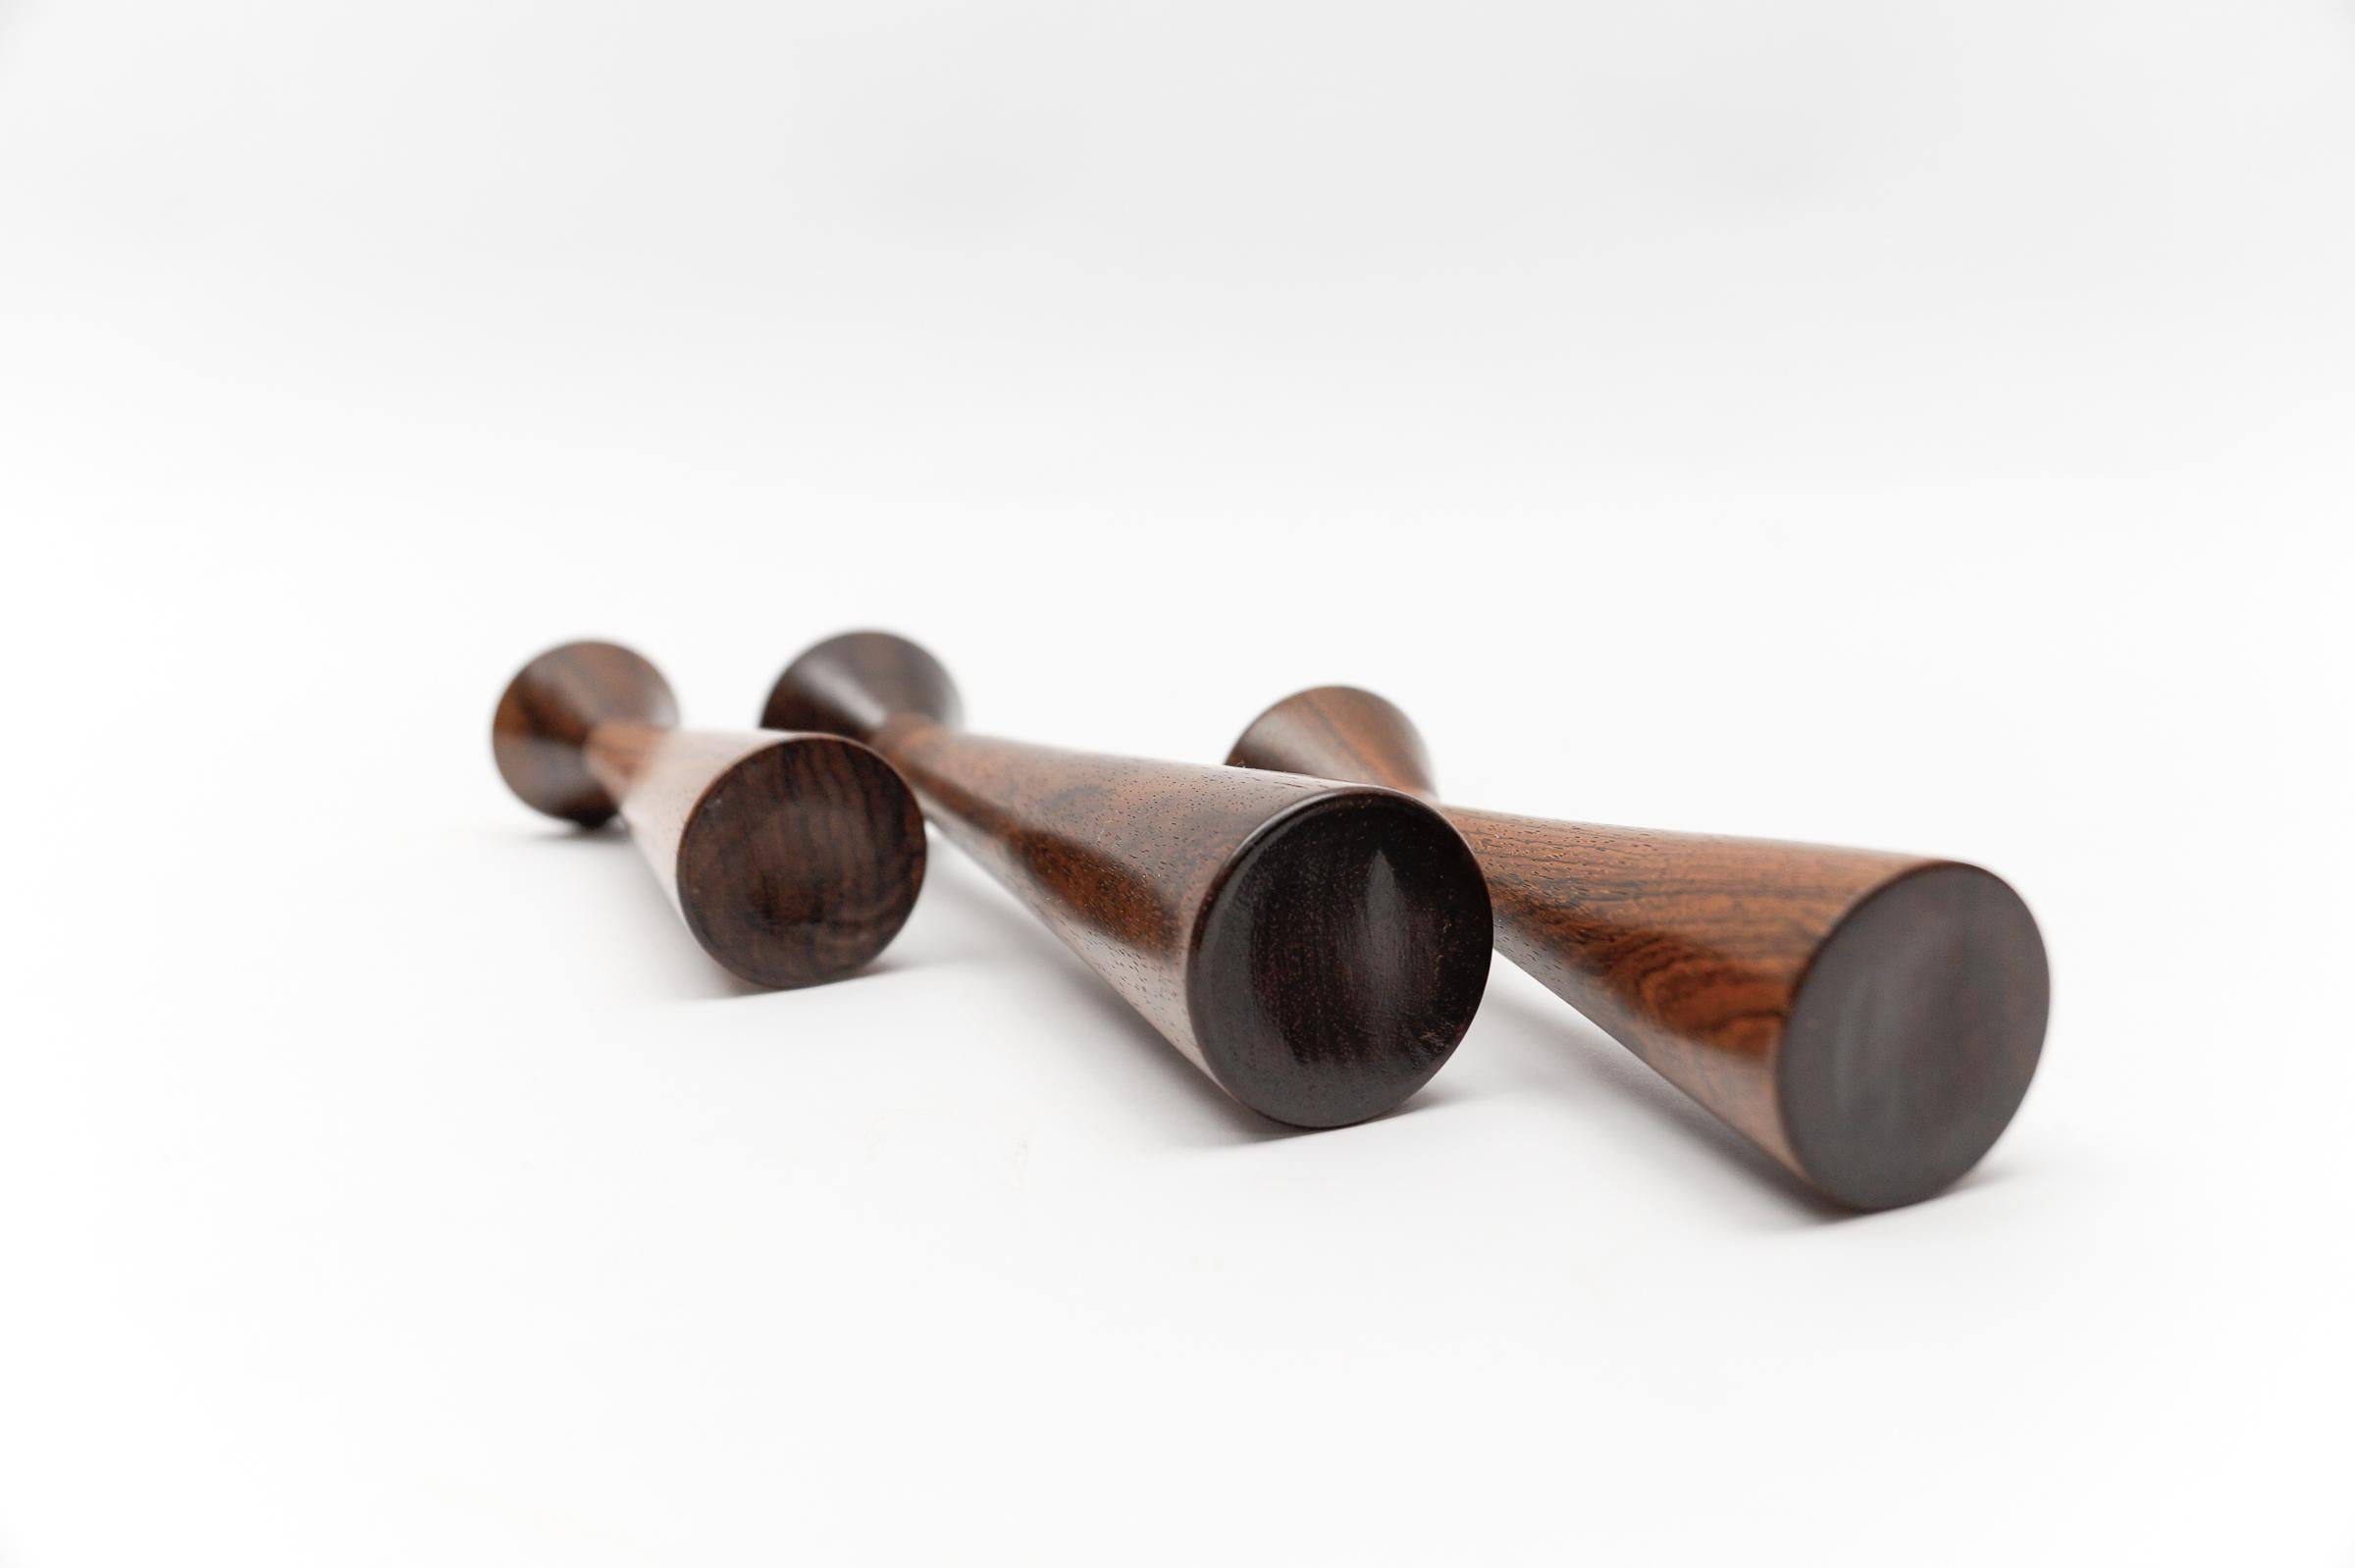 Mid-20th Century Set of 3 Danish Candlesticks, Solid Turned Rosewood, Denmark, 1950s For Sale